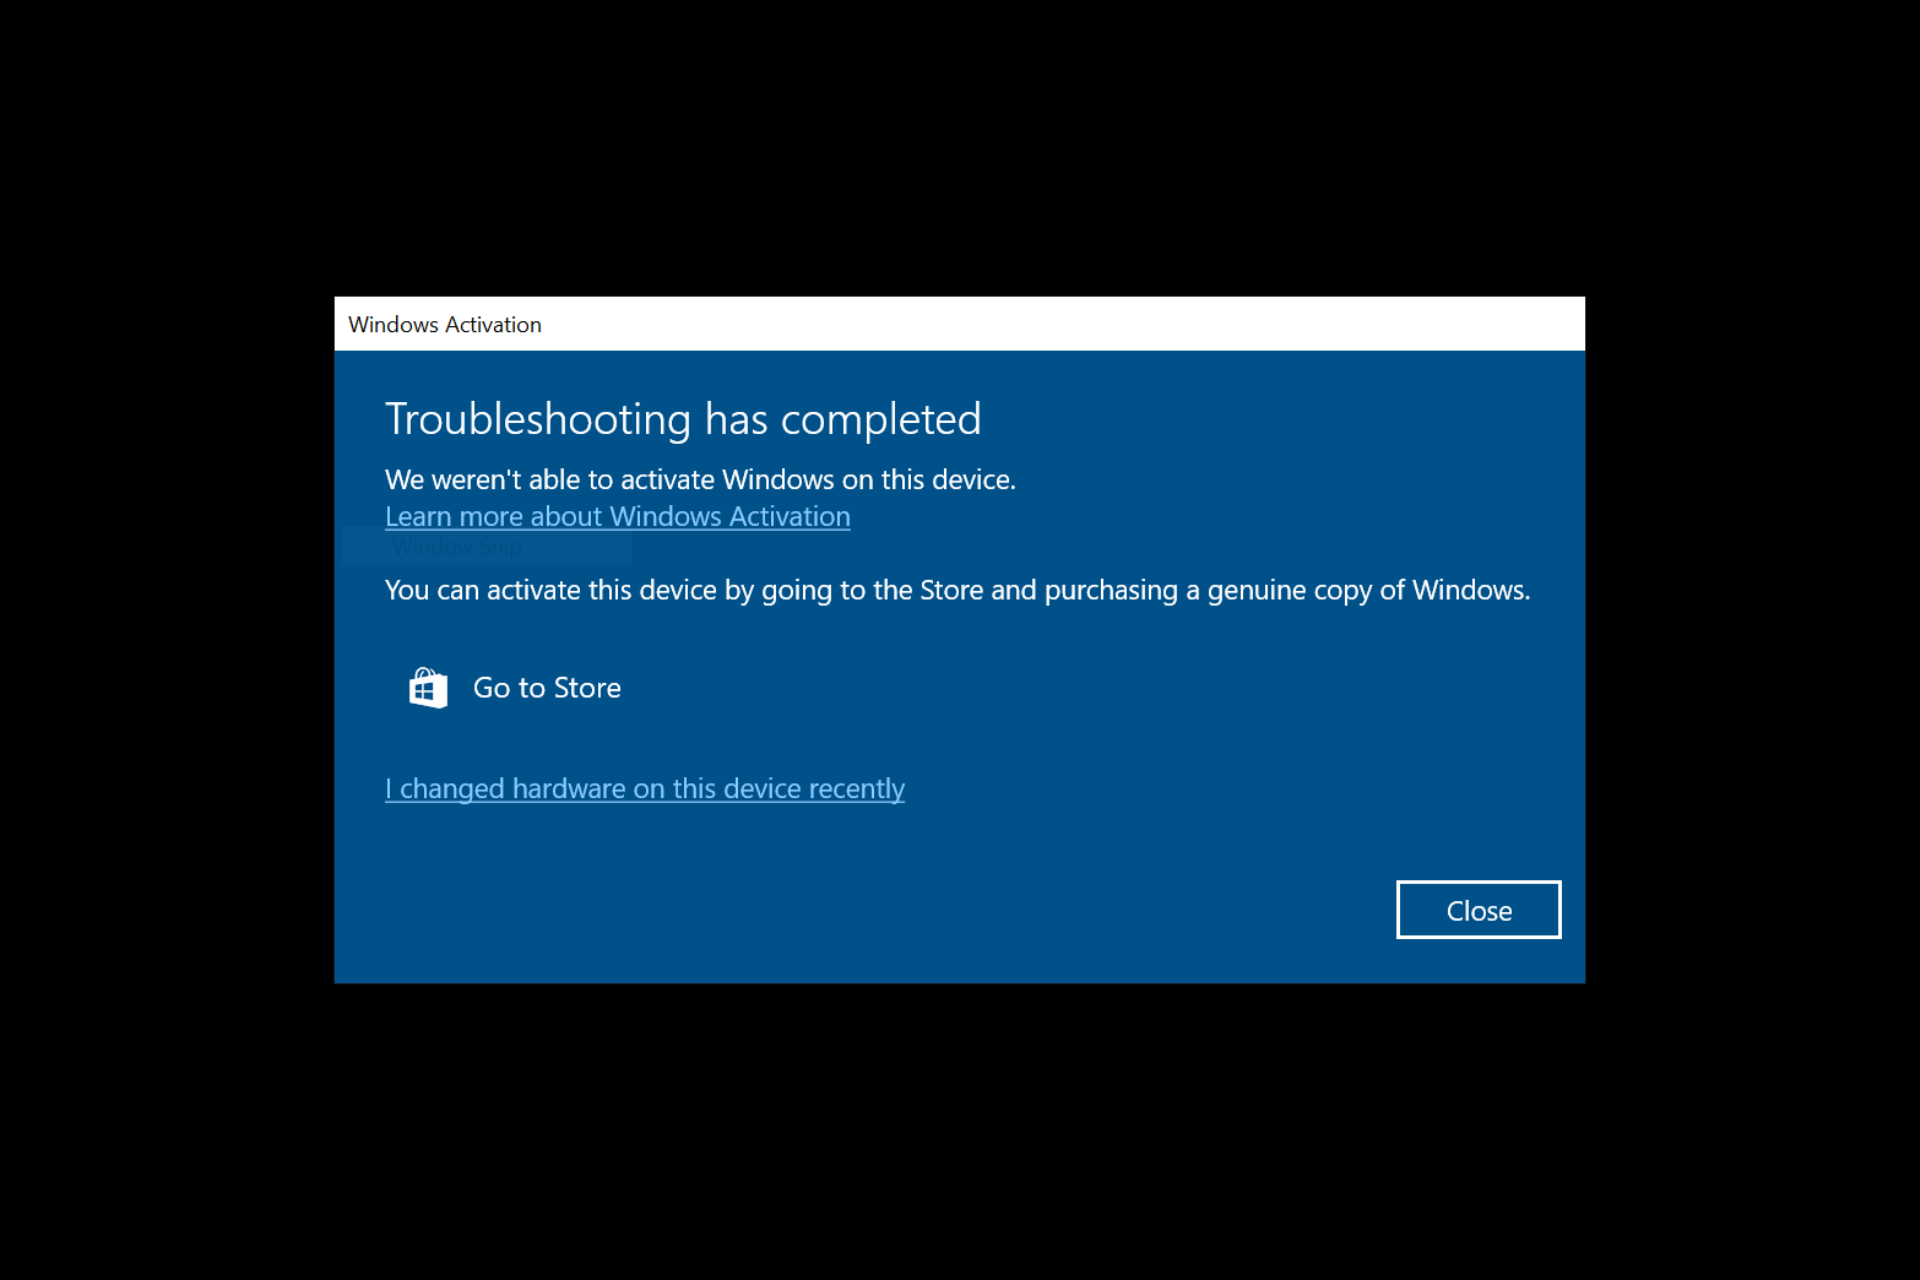 Unable to Activate Windows After Hardware Change